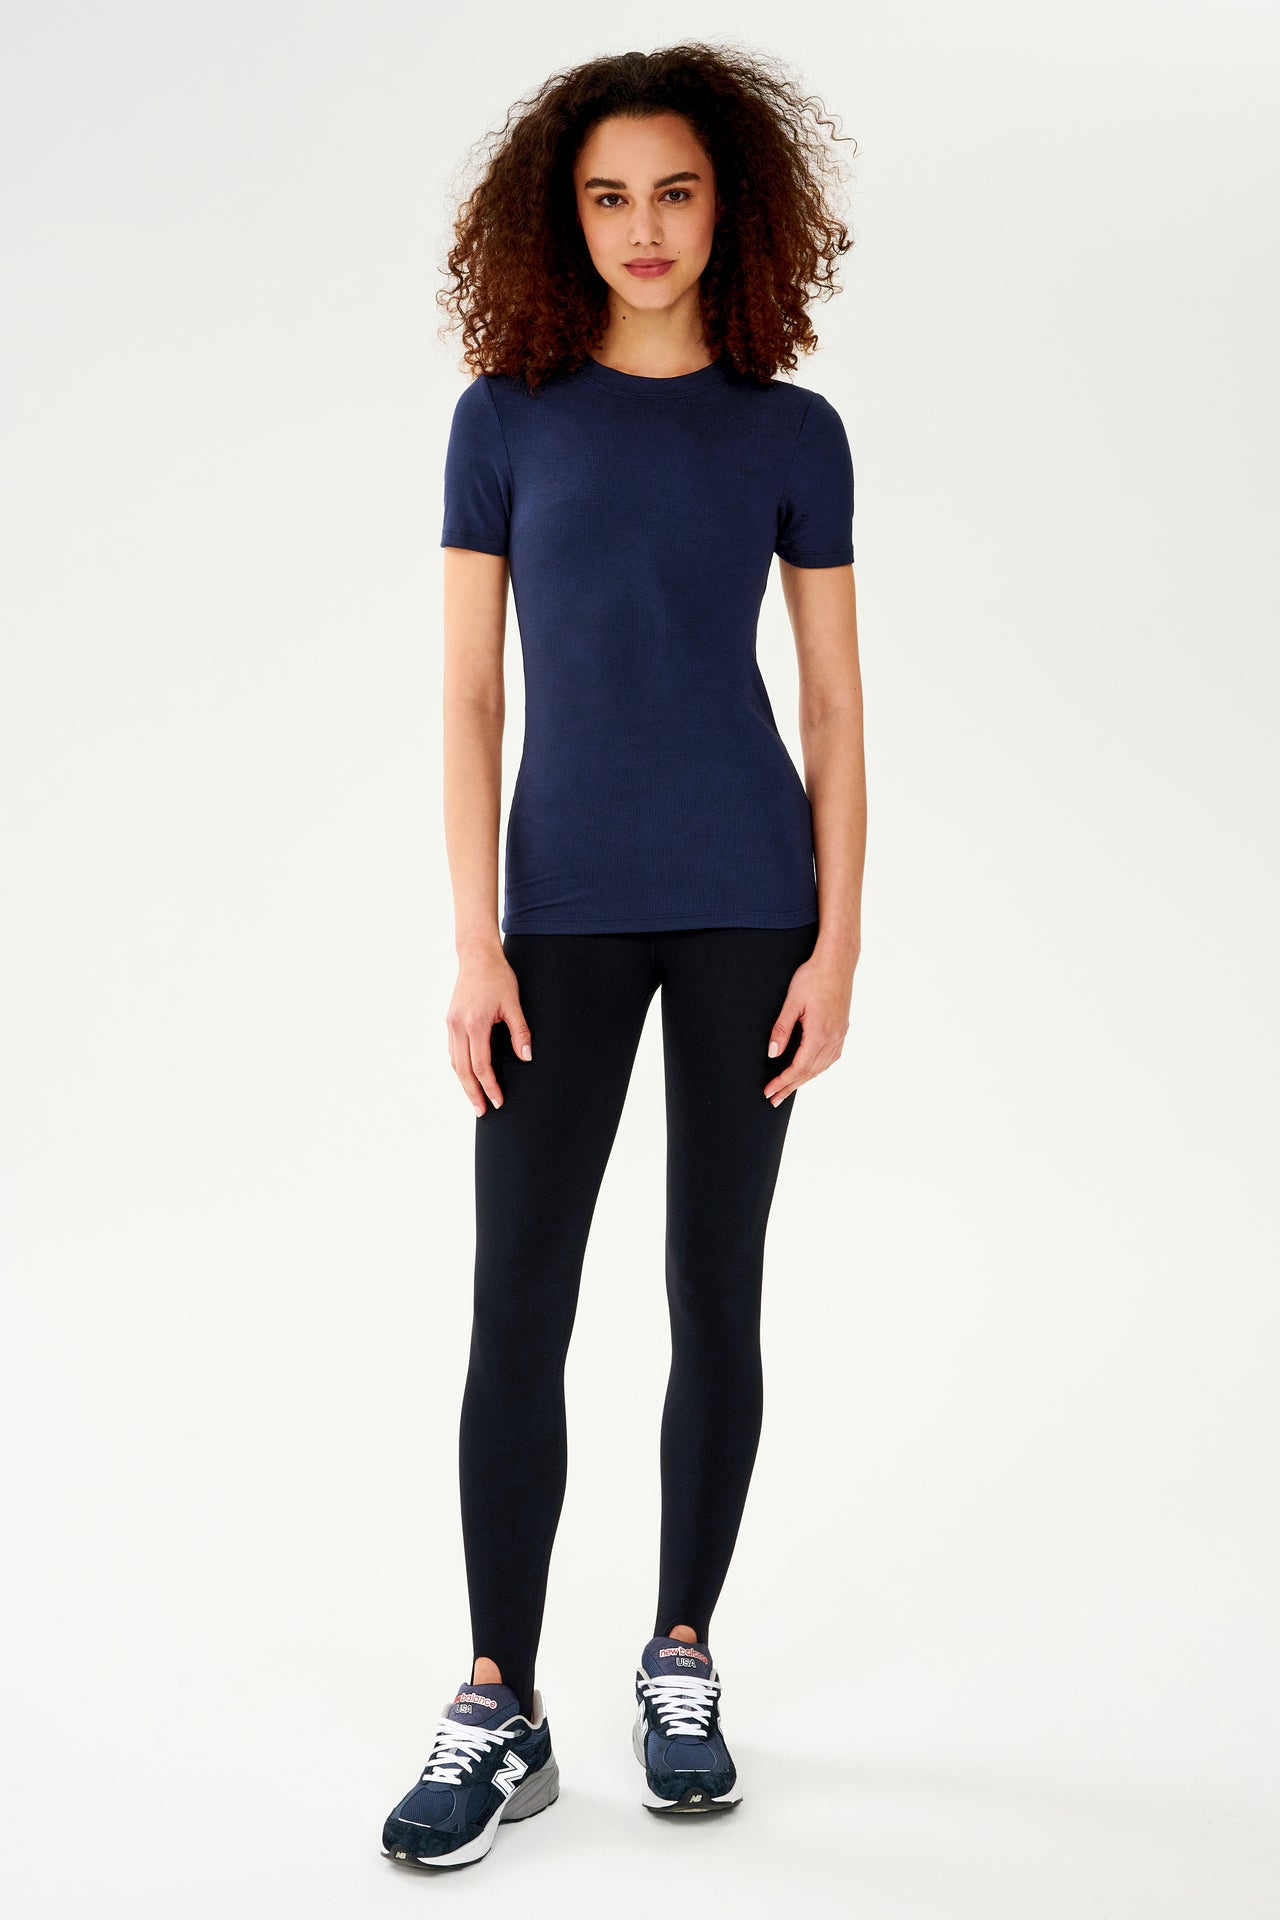 A woman wearing a SPLITS59 Louise Rib Short Sleeve in Indigo and black leggings, ready for her yoga session.